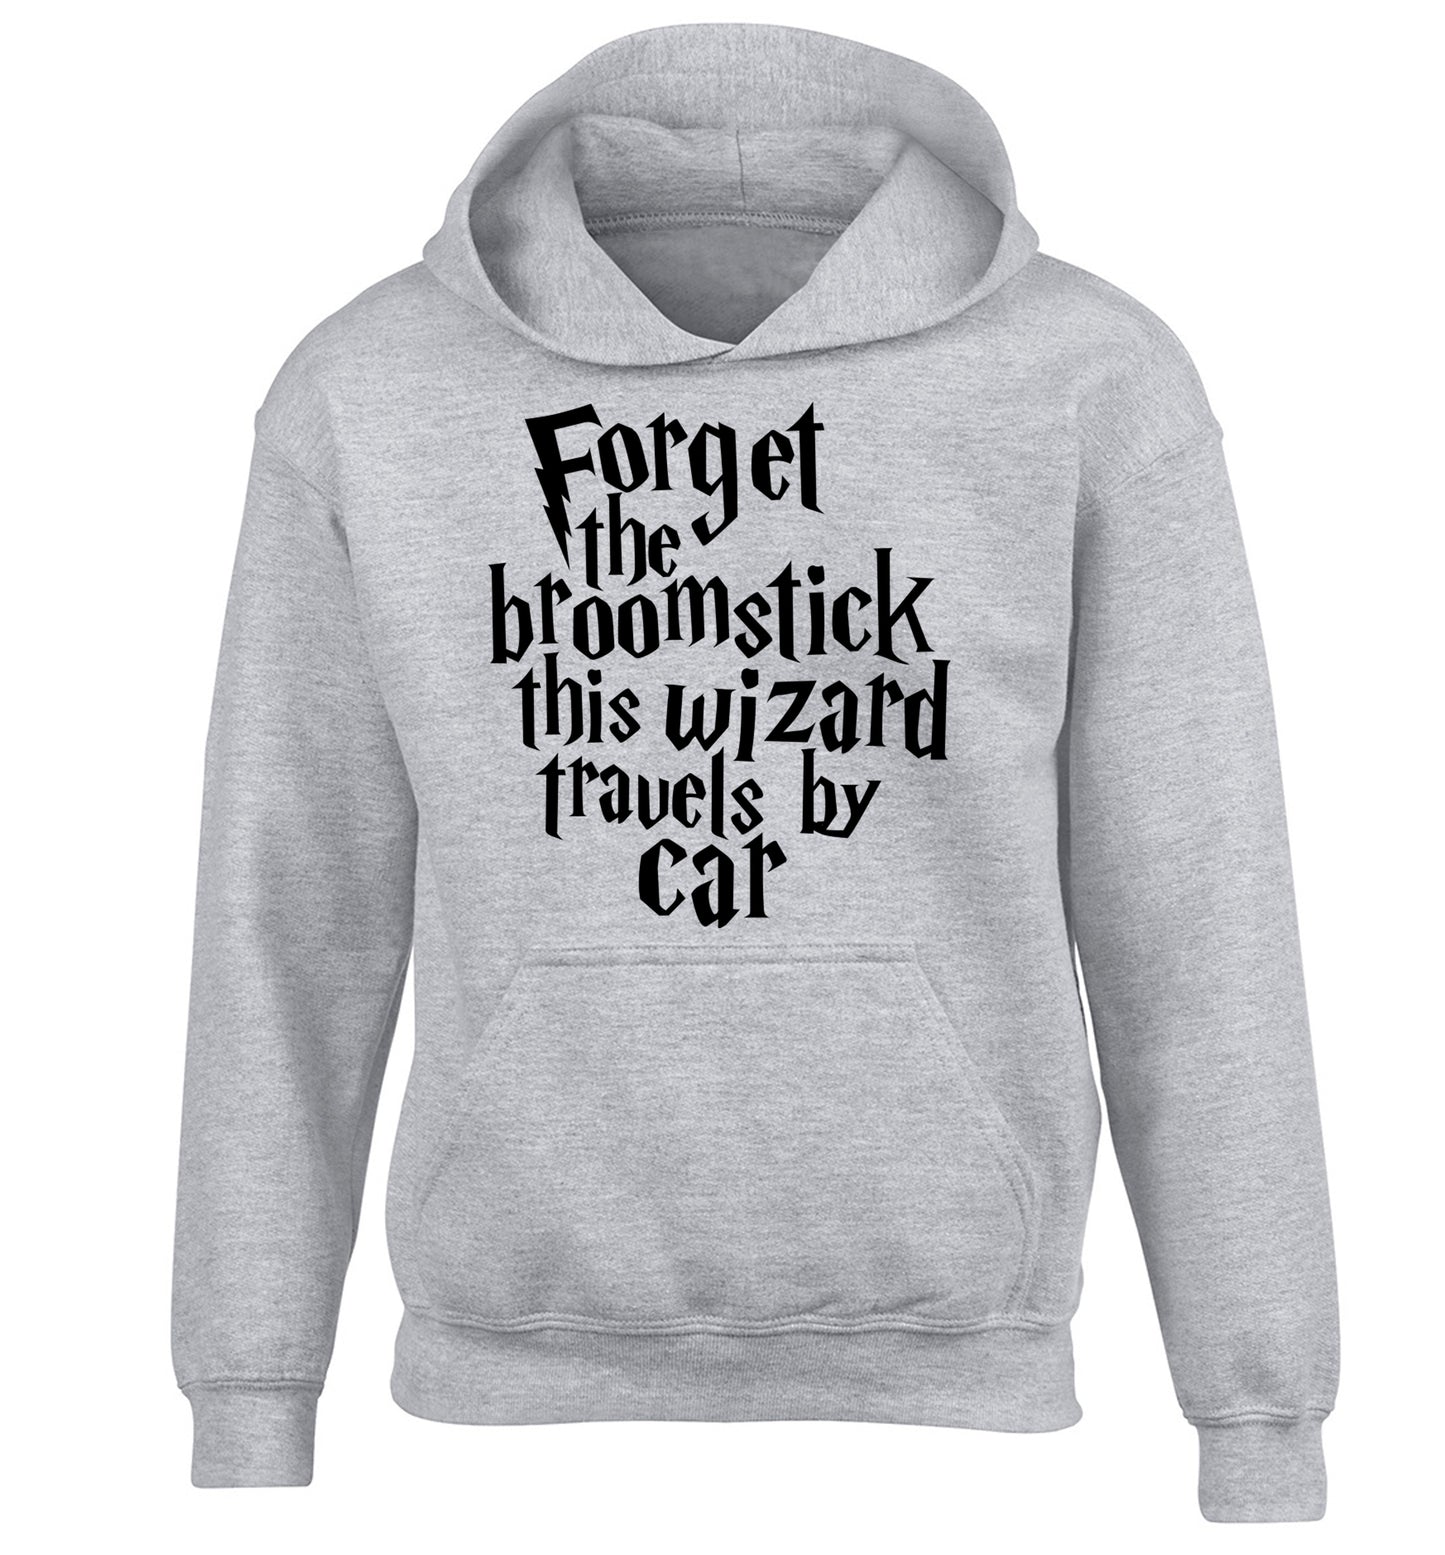 Forget the broomstick this wizard travels by car children's grey hoodie 12-14 Years